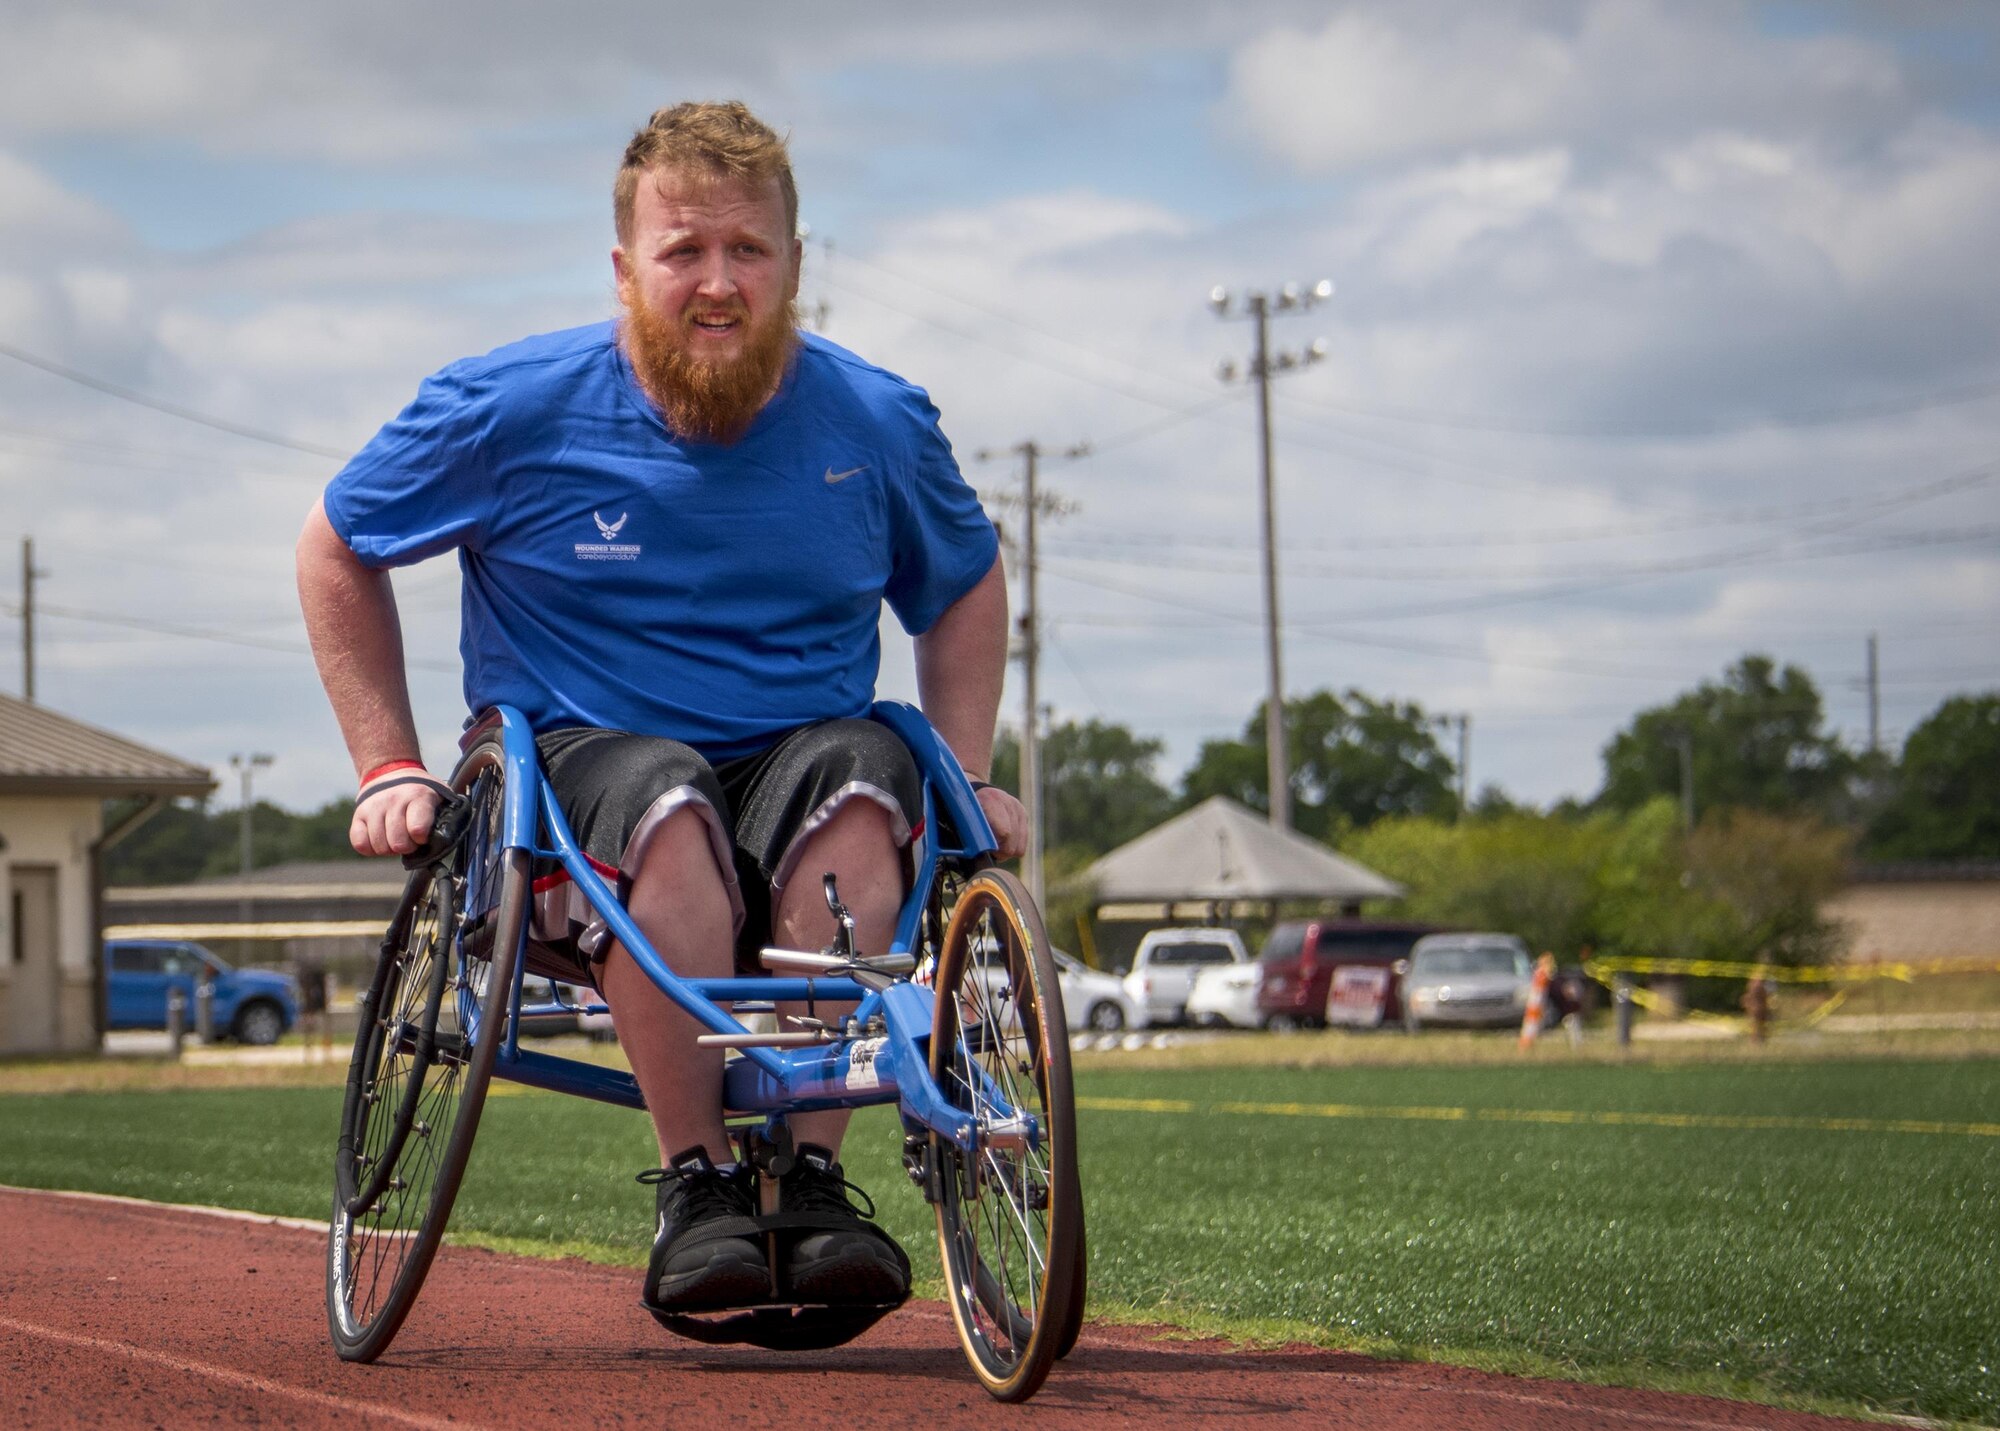 Robert Wiles, a Warrior CARE athlete, rolls down the track in his sports chair at a track and field session at the adaptive sports camp at Eglin Air Force Base, Fla., April 24. The base hosts the week-long Wound Warrior CARE event that helps recovering wounded, ill and injured military members through specific hand-on rehabilitative training. (U.S. Air Force photo/Samuel King Jr.)